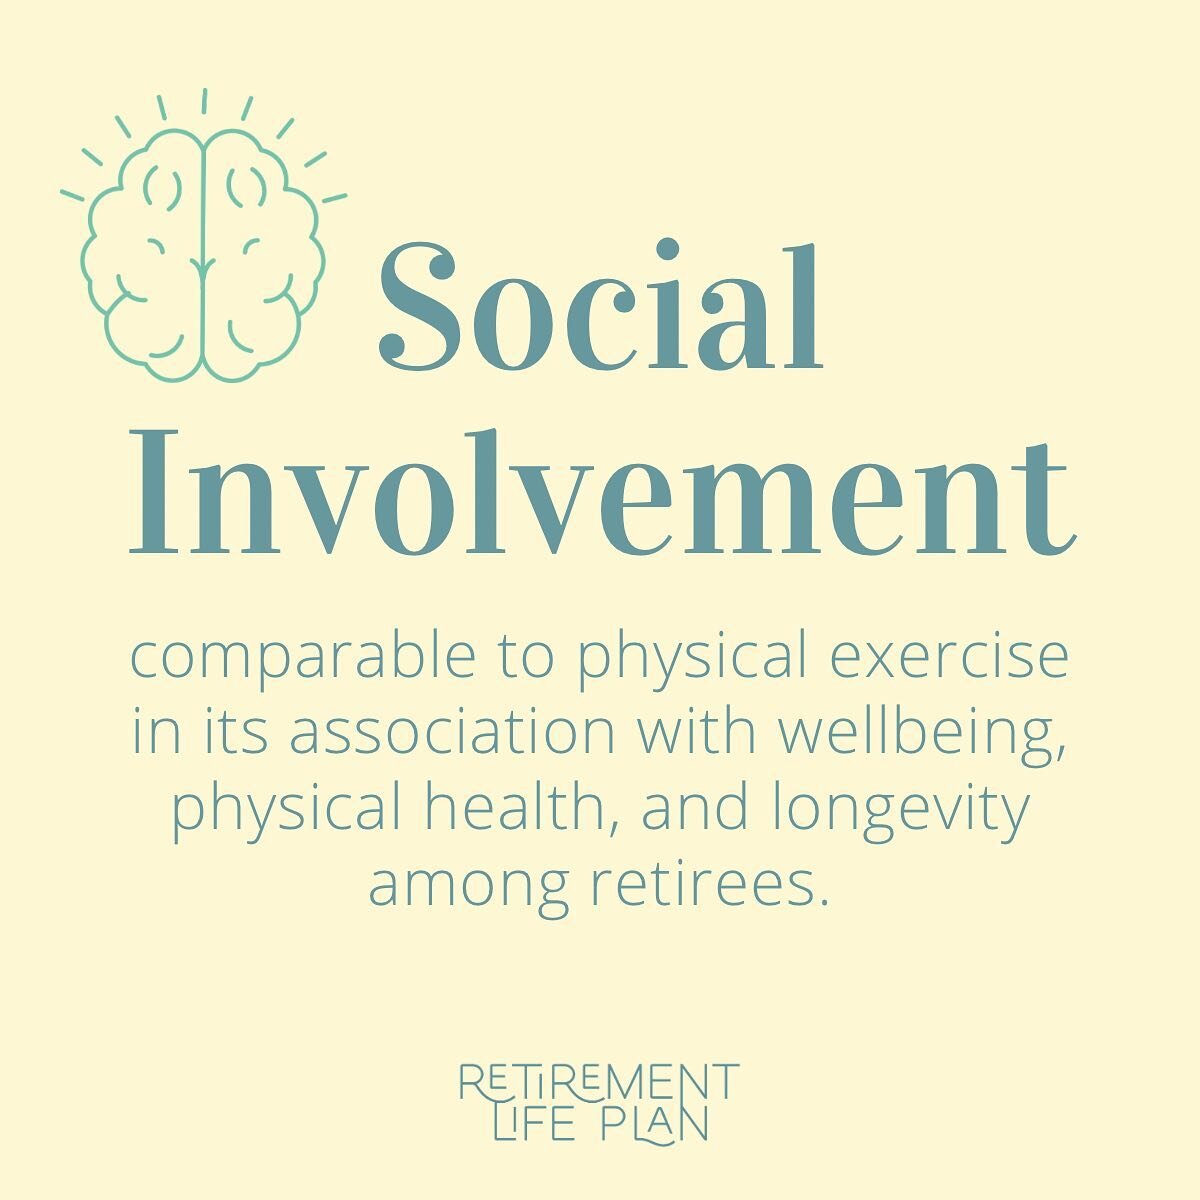 Retirement can be an opportunity to improve health, with more time for (better) sleep, eating healthier, and exercise. In fact, maintaining health is a top priority for retirees, next to finances. But studies are starting to suggest that we need to l